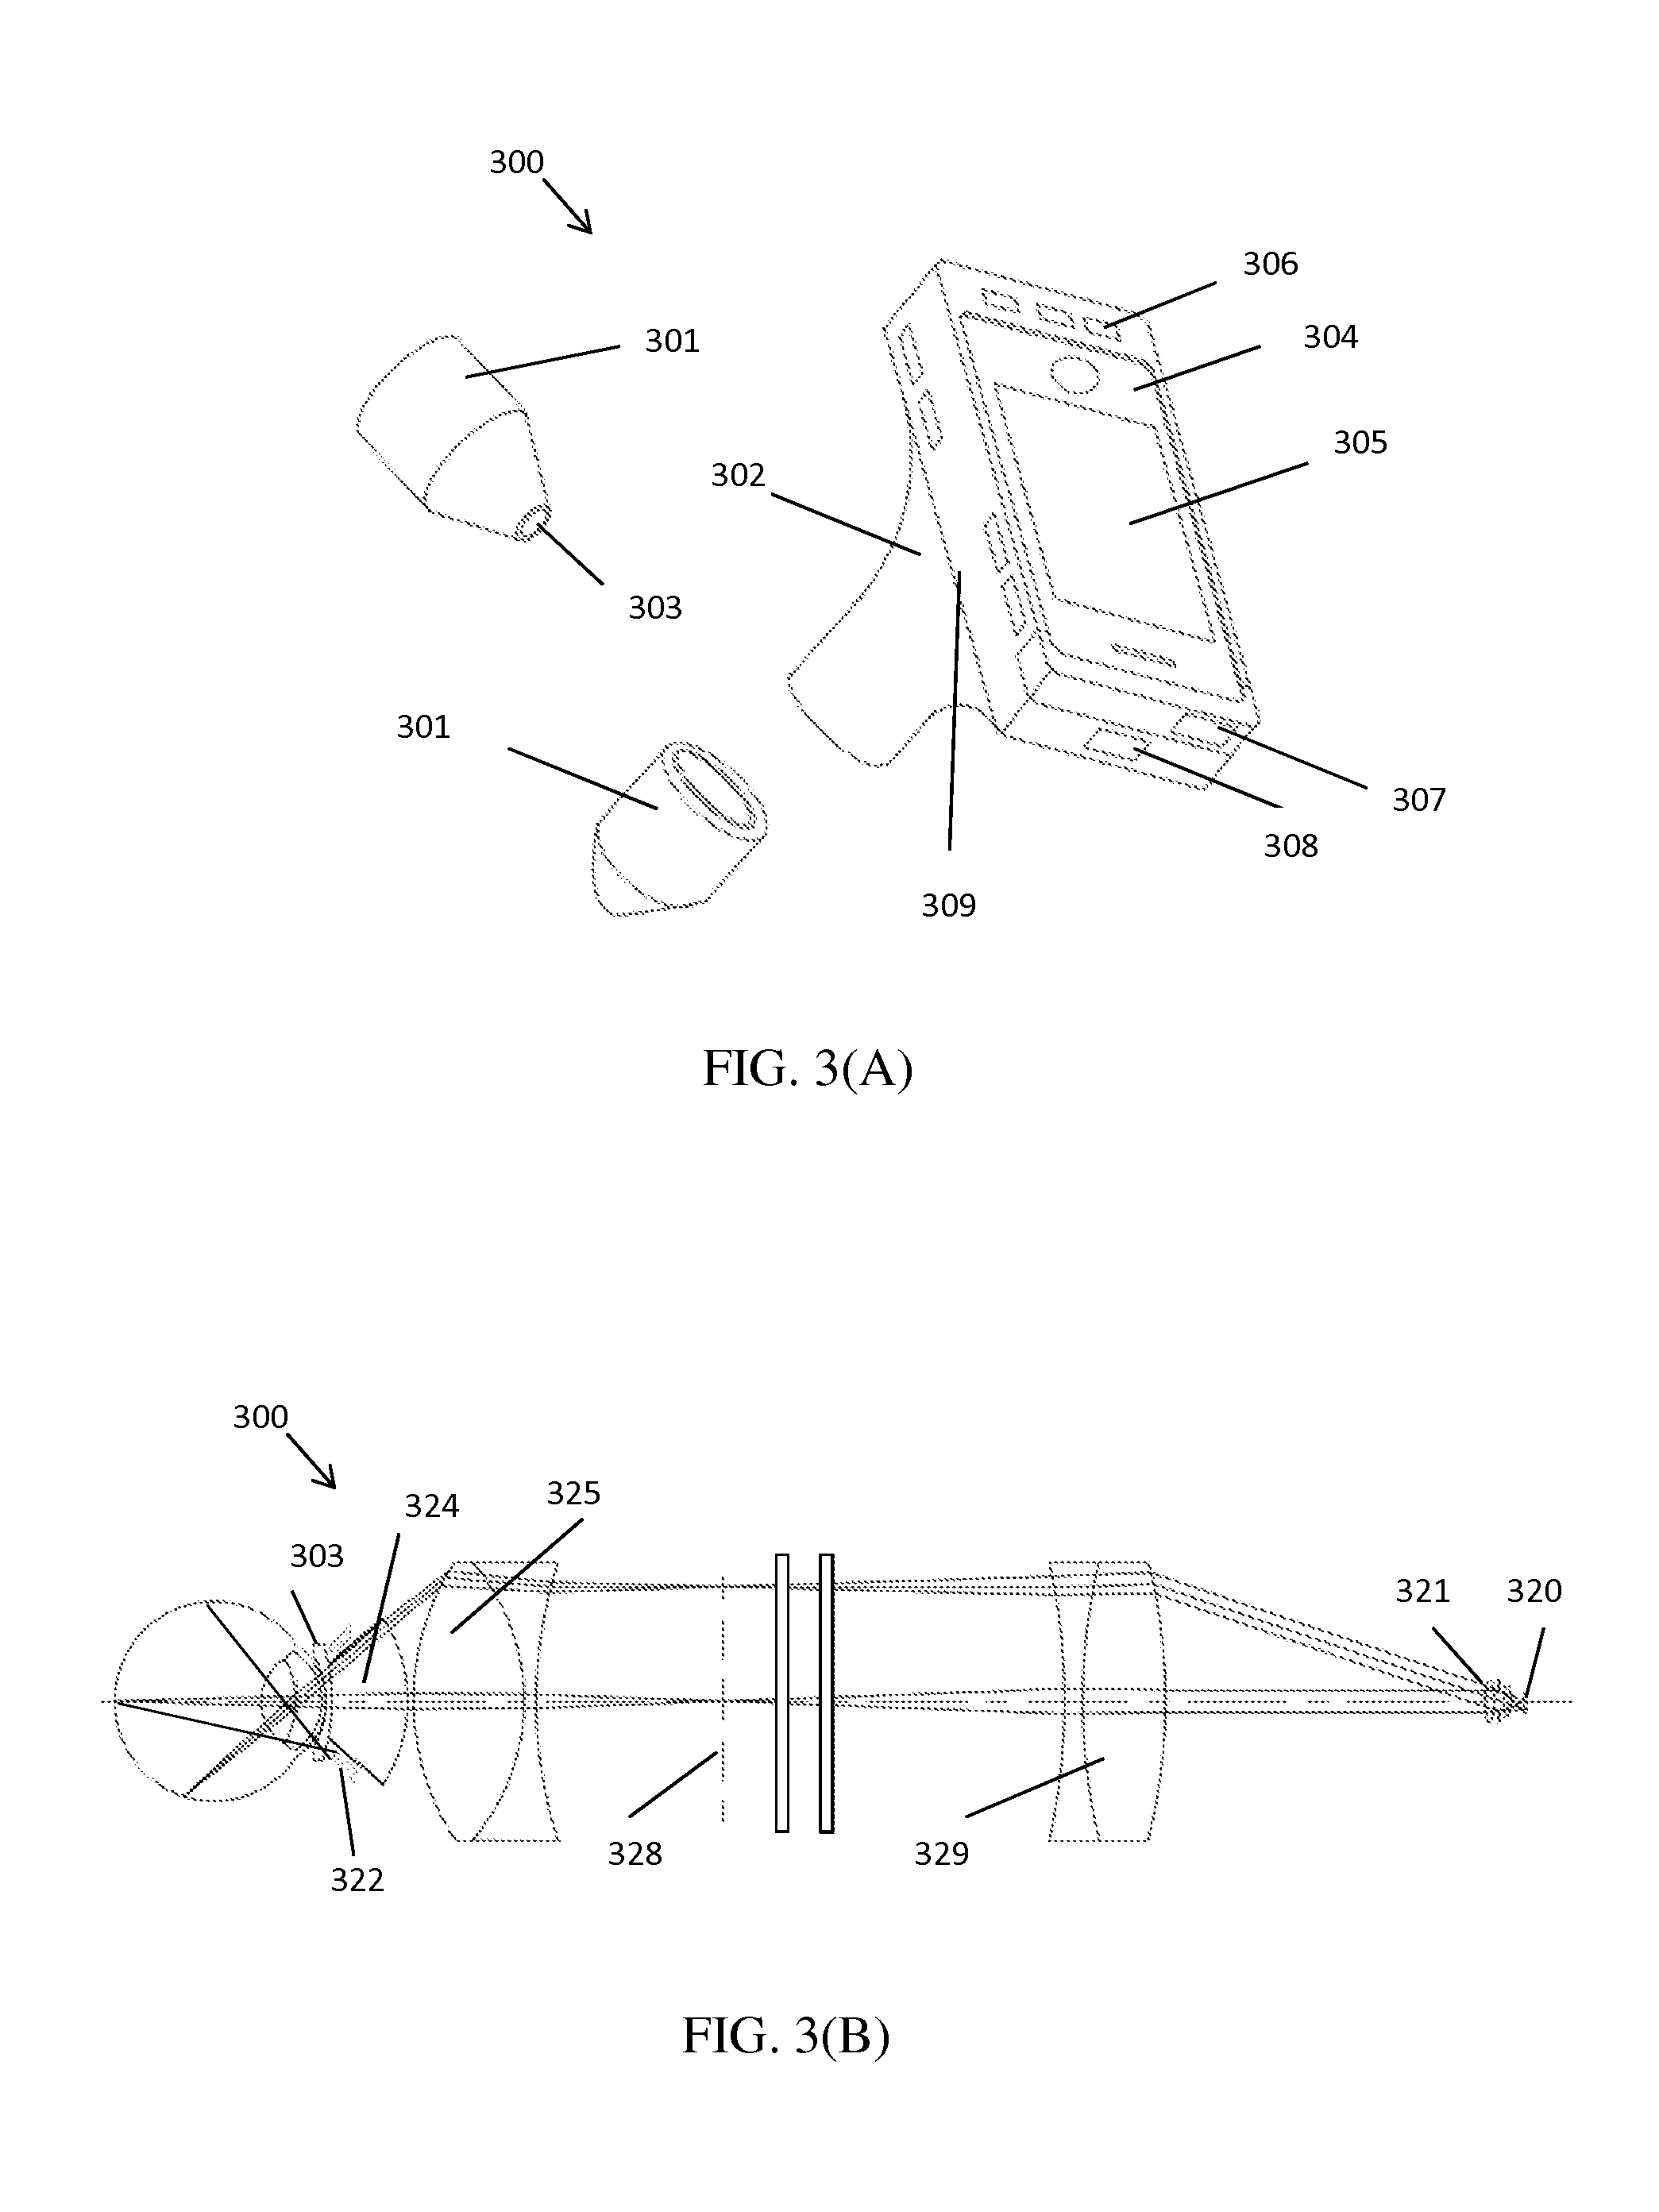 Eye imaging apparatus and systems